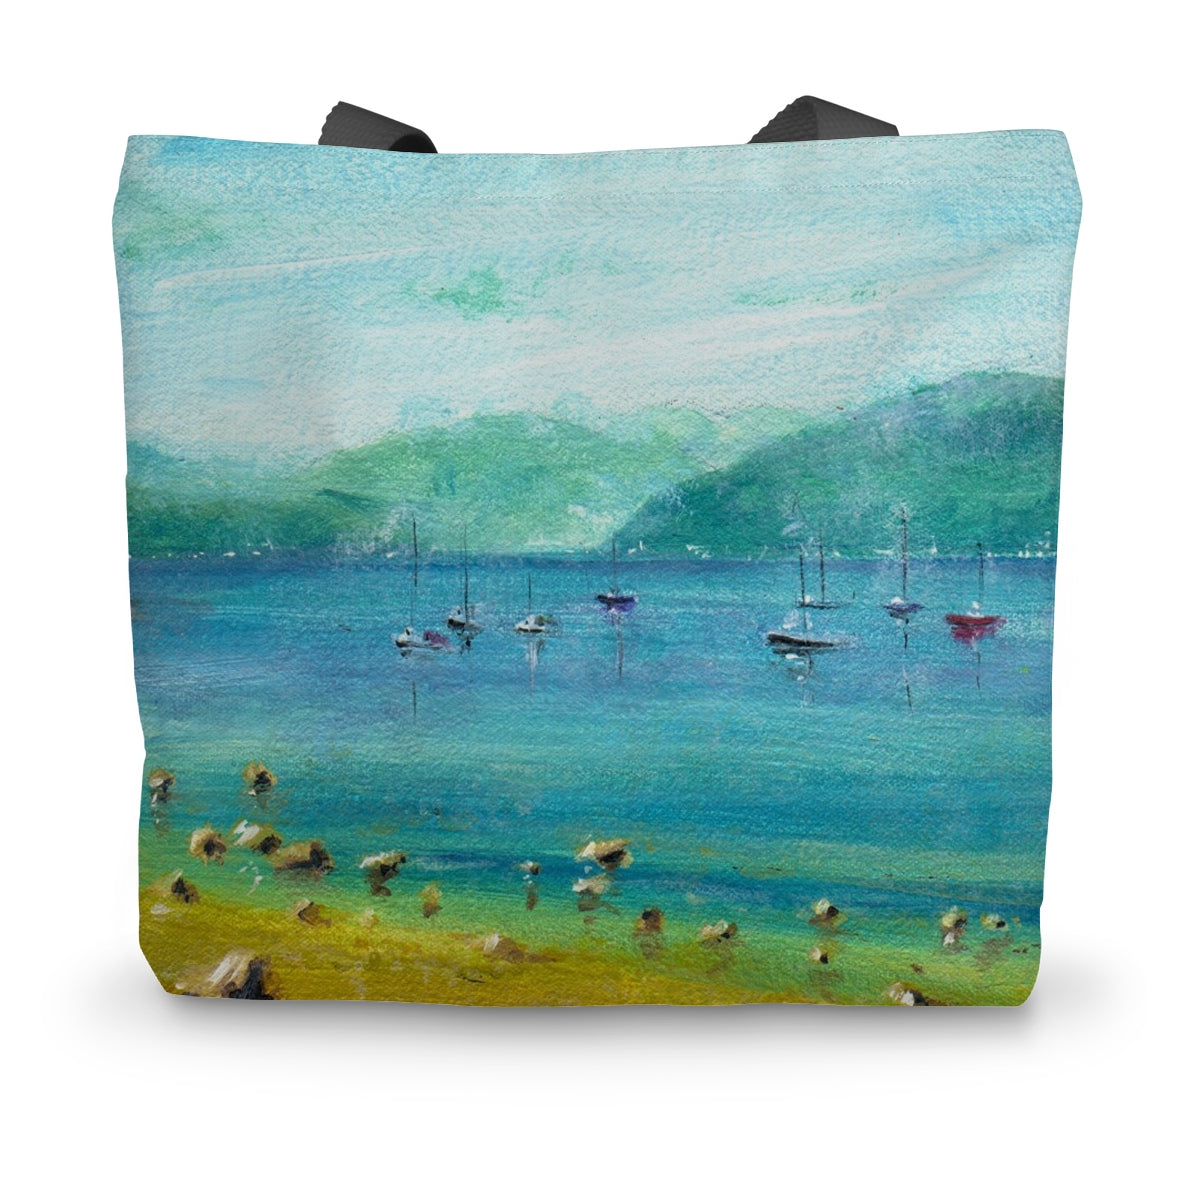 A Clyde Summer Day Art Gifts Canvas Tote Bag